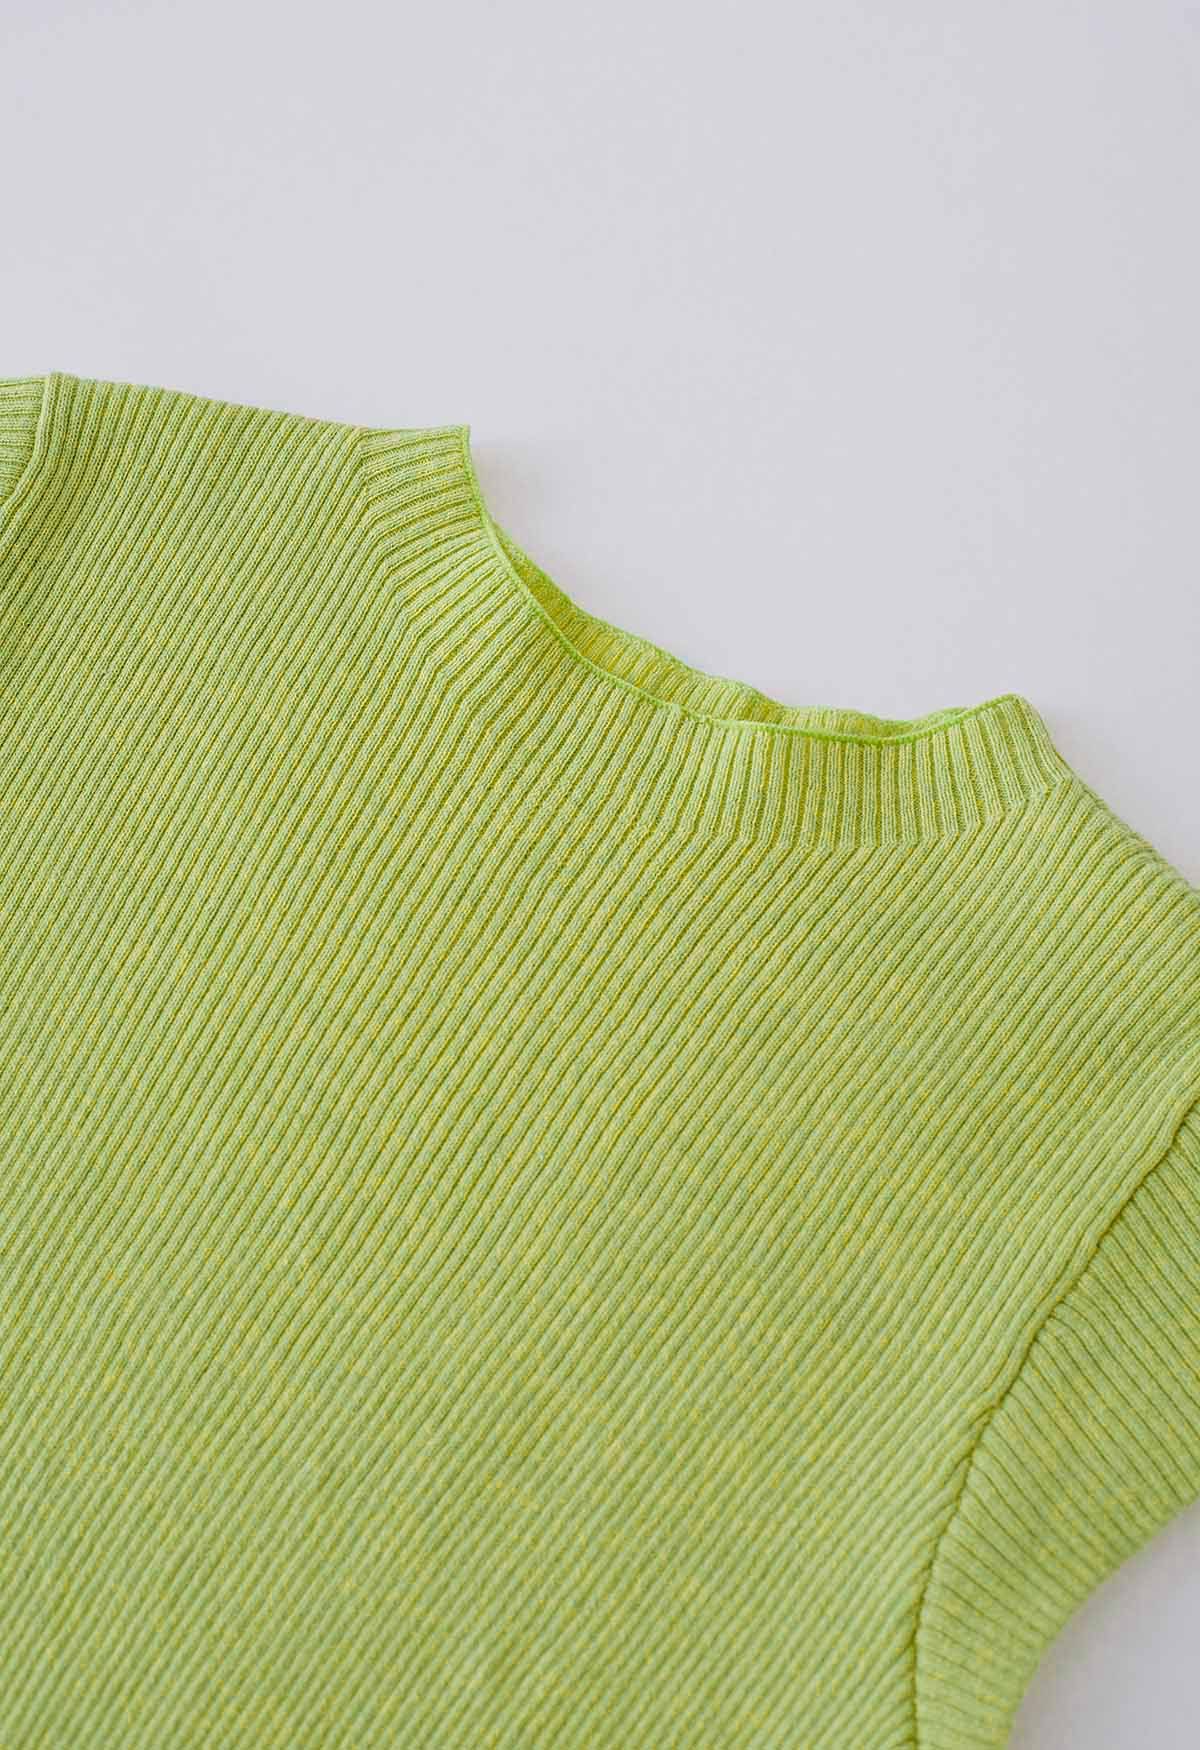 Back Drawstring Sleeveless Knit Top in Lime